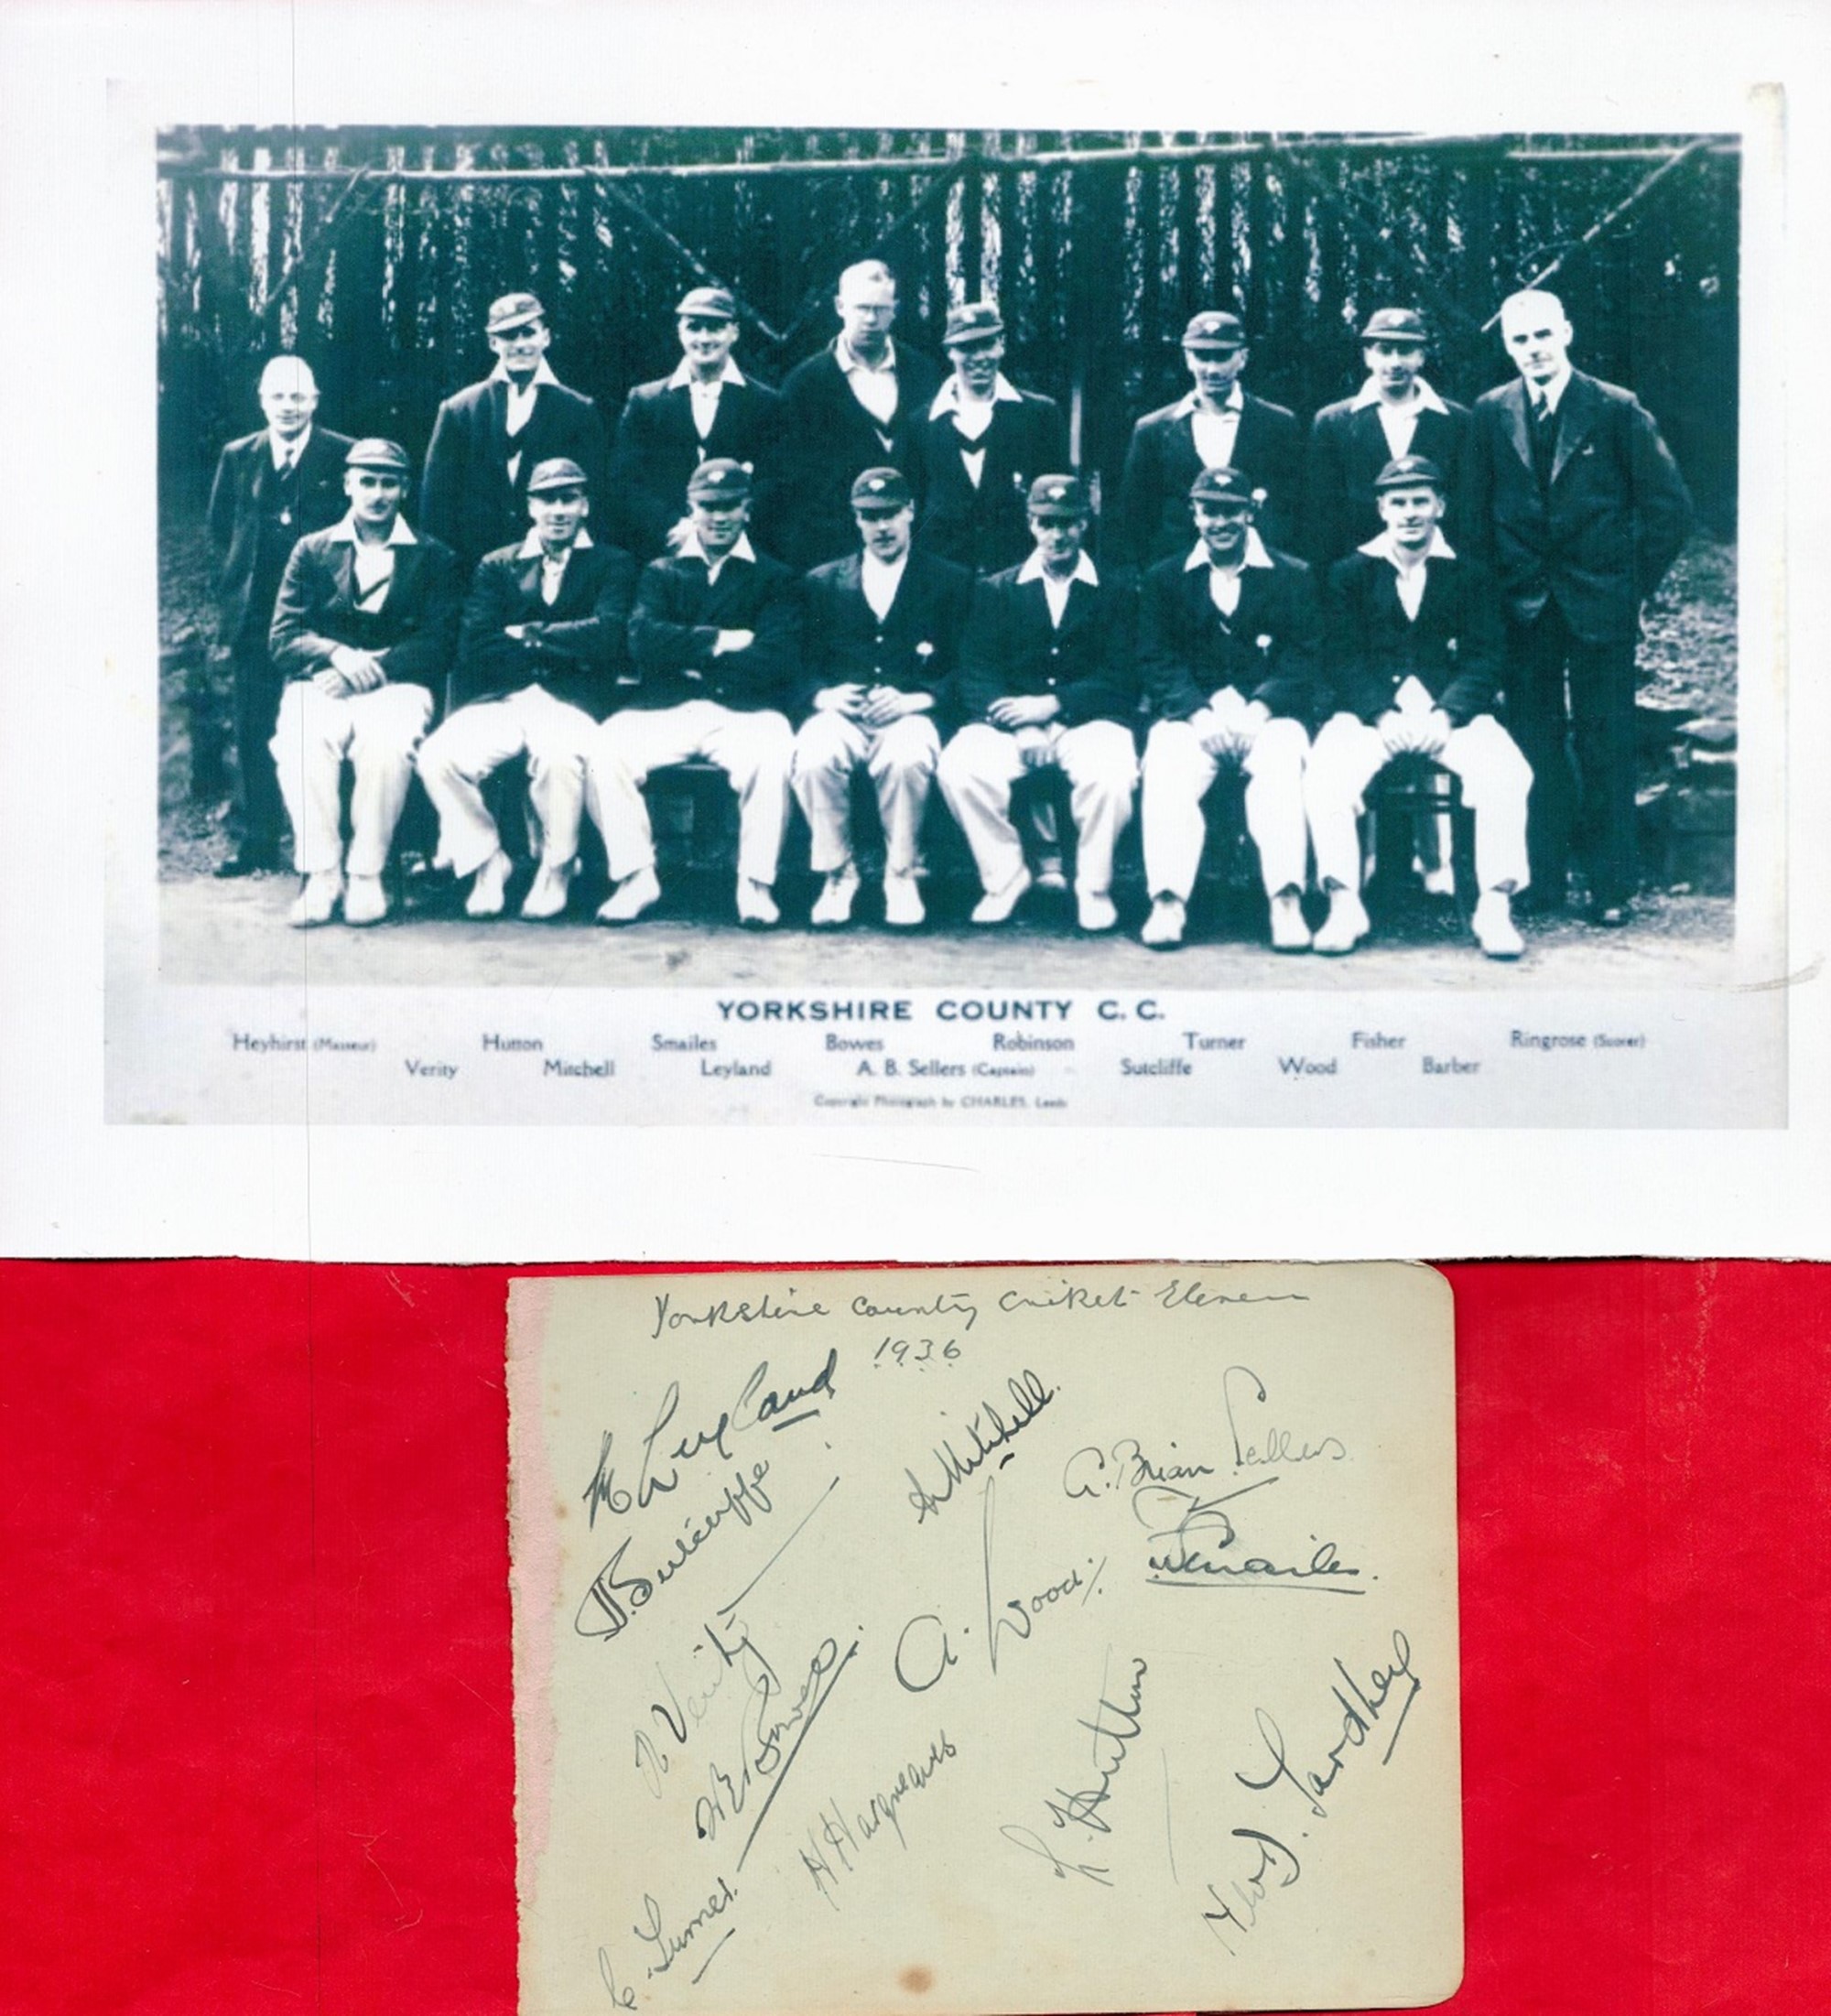 Yorkshire County Cricket Club 1936 multi signed 5x4 album page includes 12 legendary signatures such